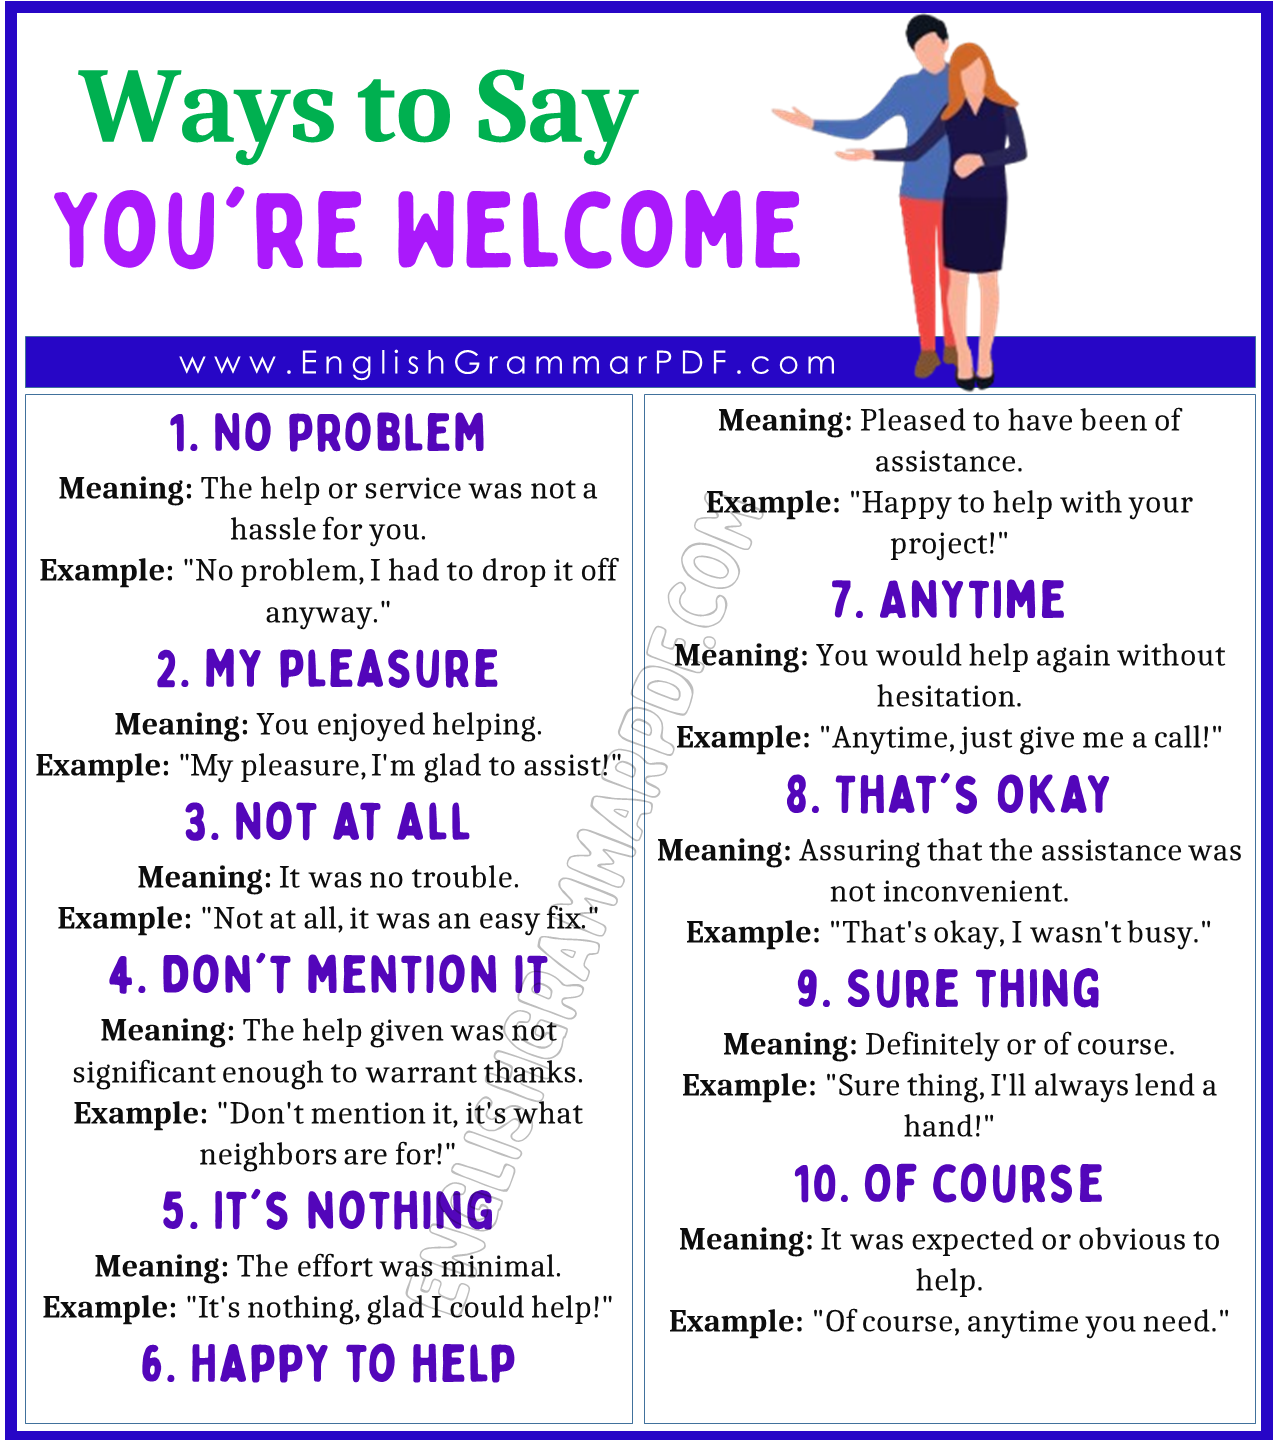 Ways to Say You're Welcome